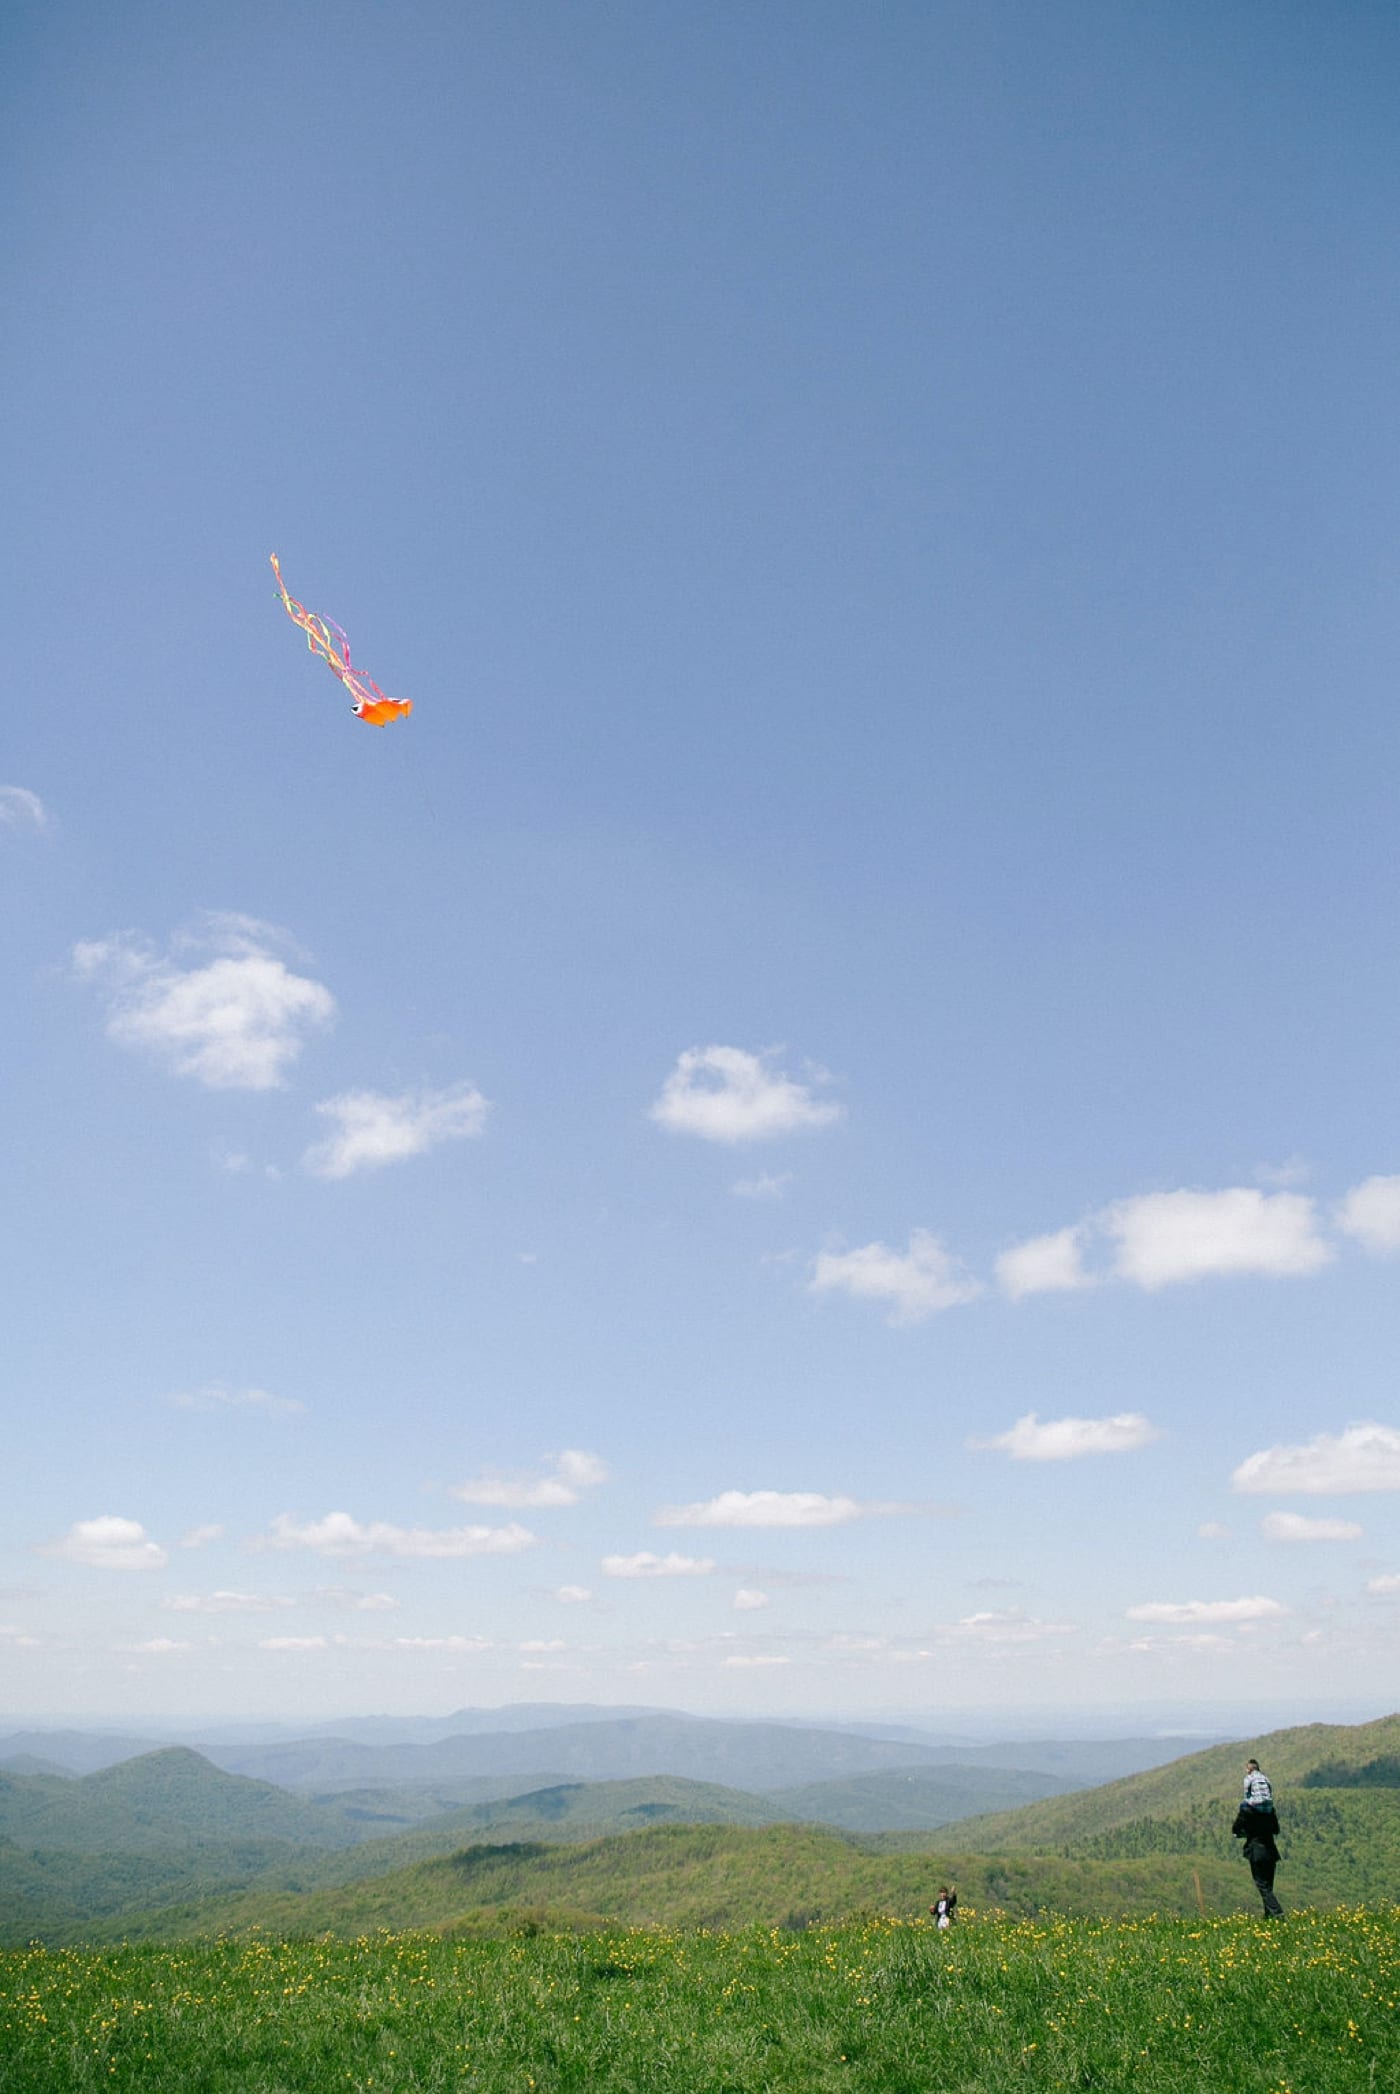 Flying a kite on Max Patch